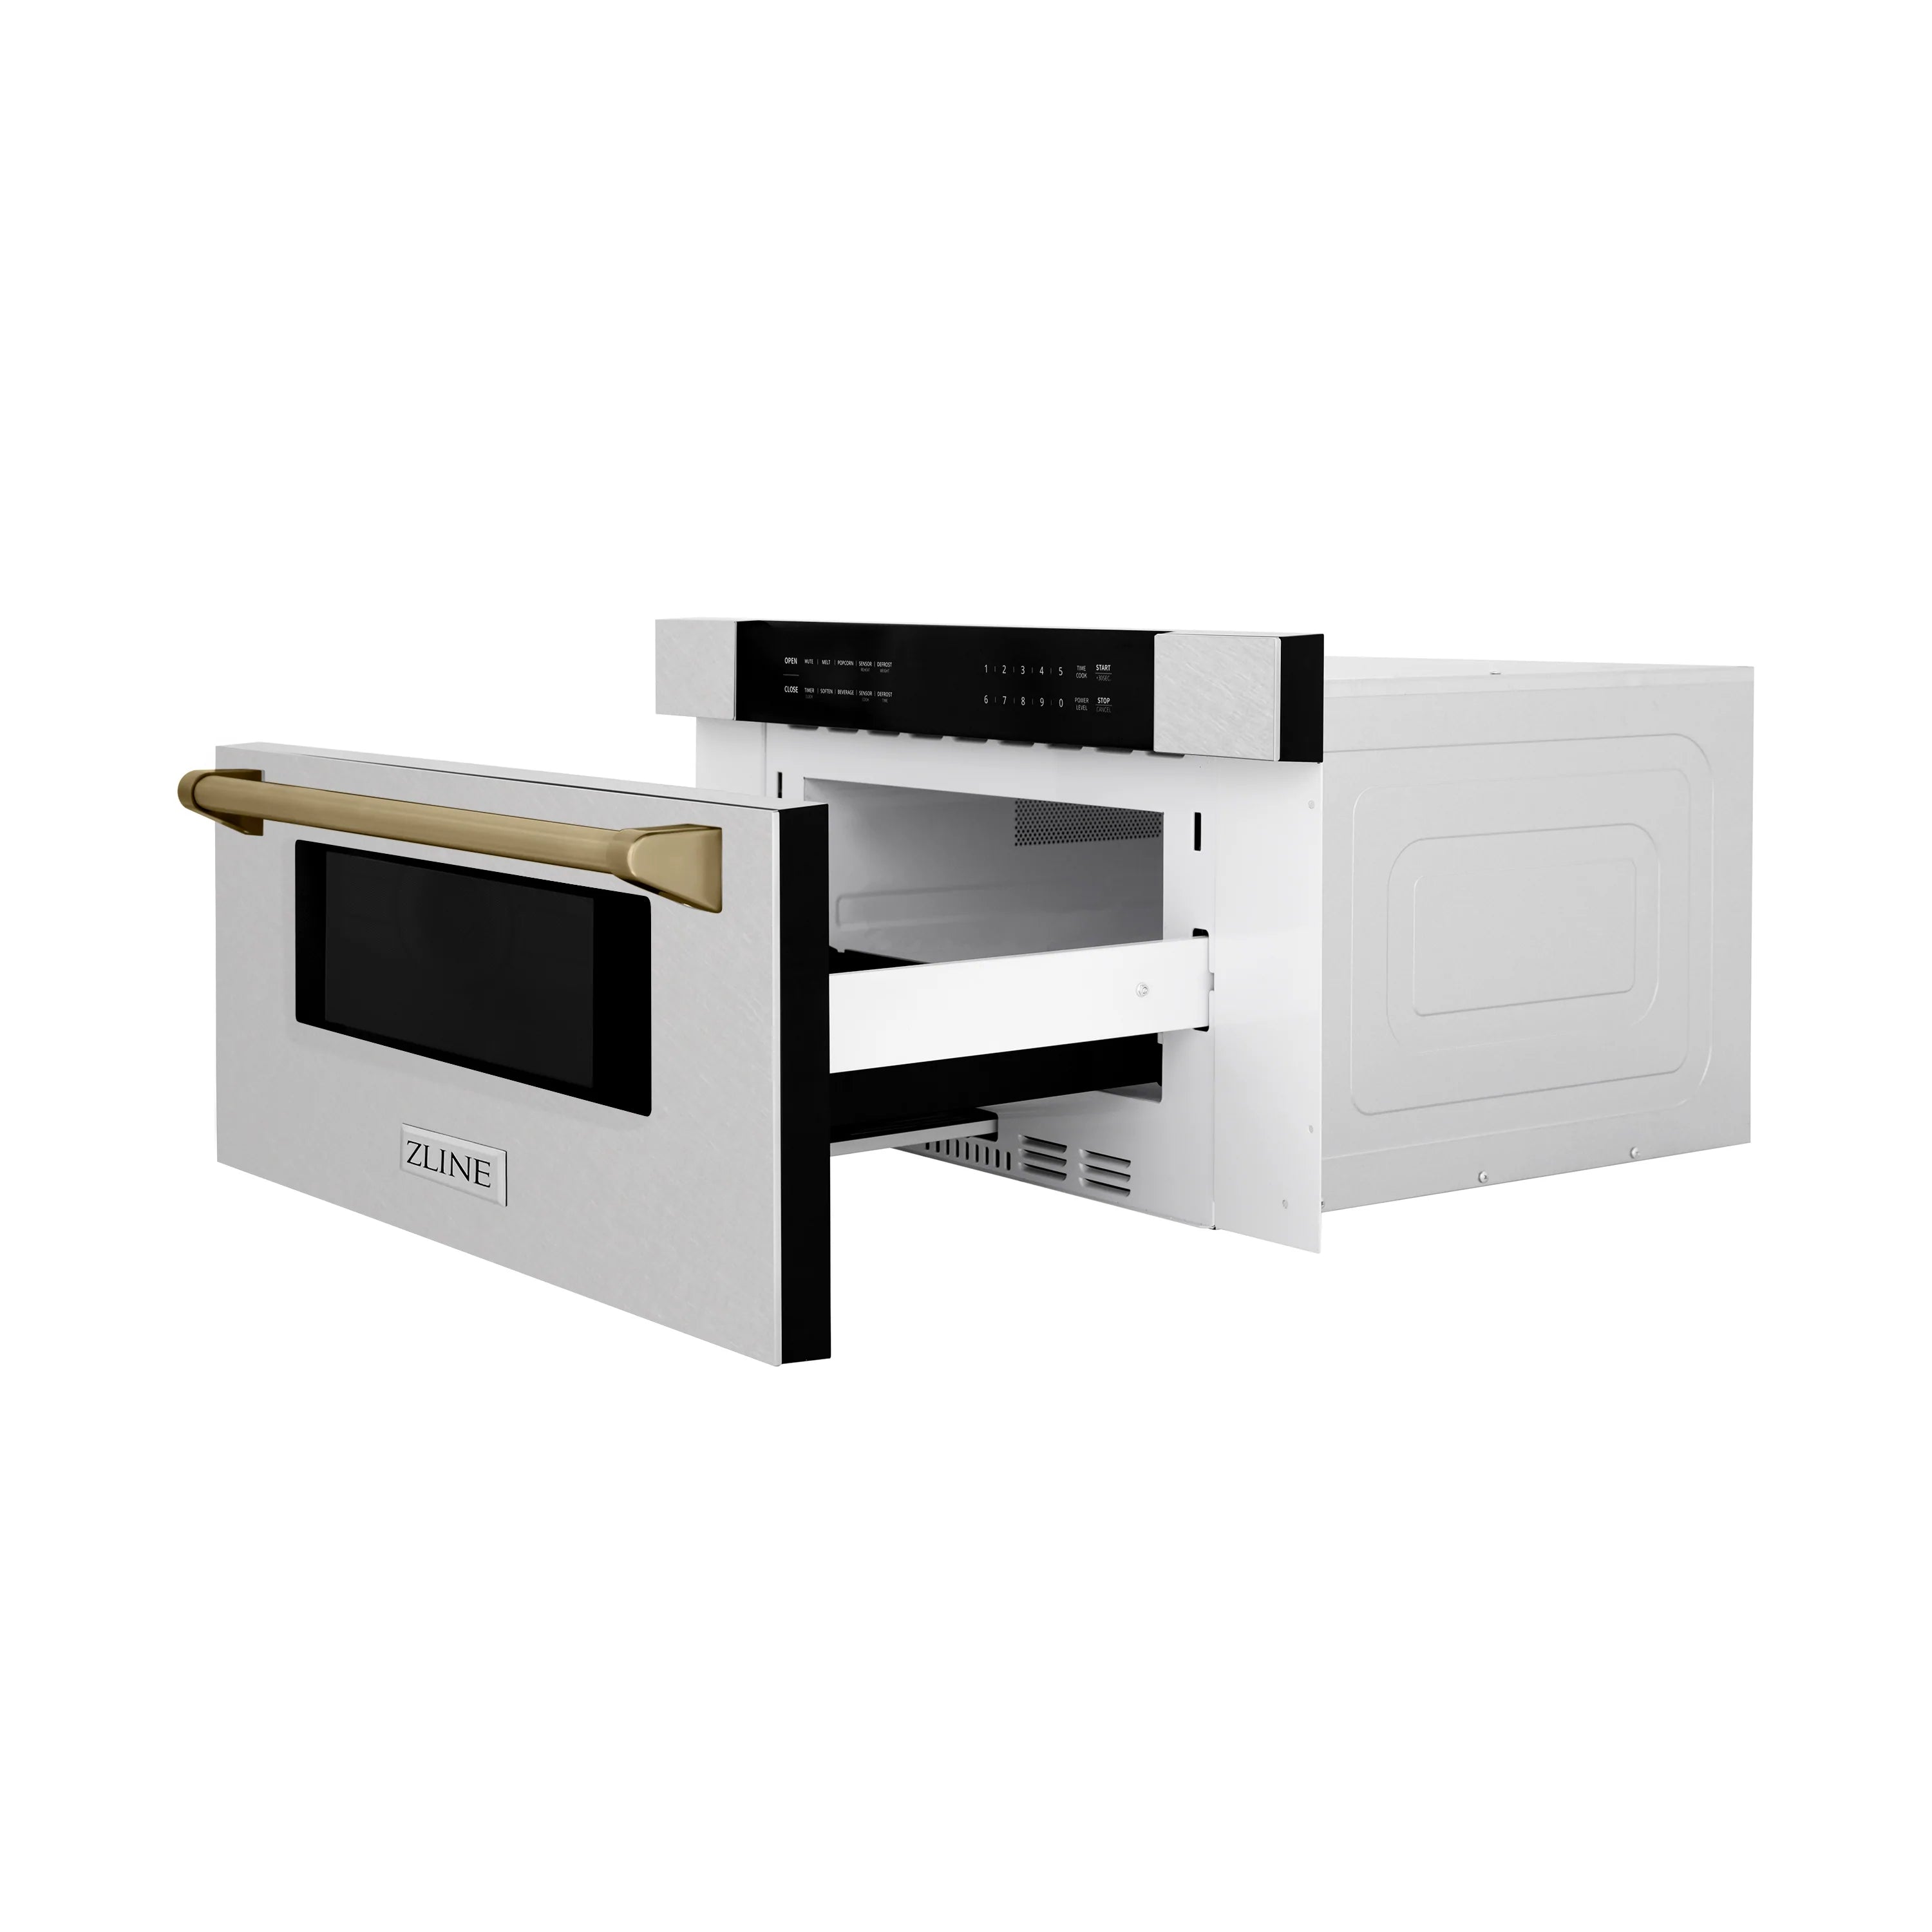 ZLINE Autograph Edition 30" 1.2 cu. ft. Built-In Microwave Drawer in Fingerprint Resistant Stainless Steel with Accents (MWDZ-30-SS)